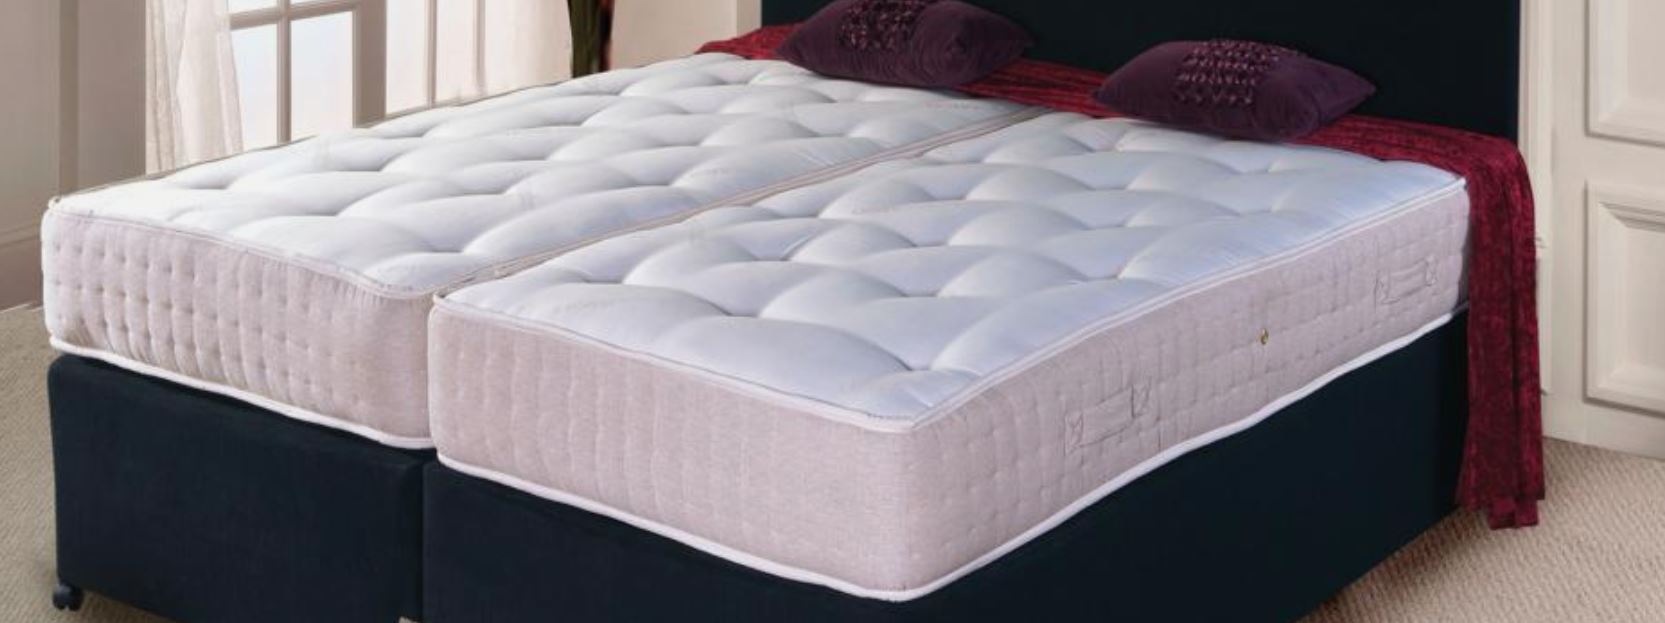 What Is a Zip and Link Mattress?